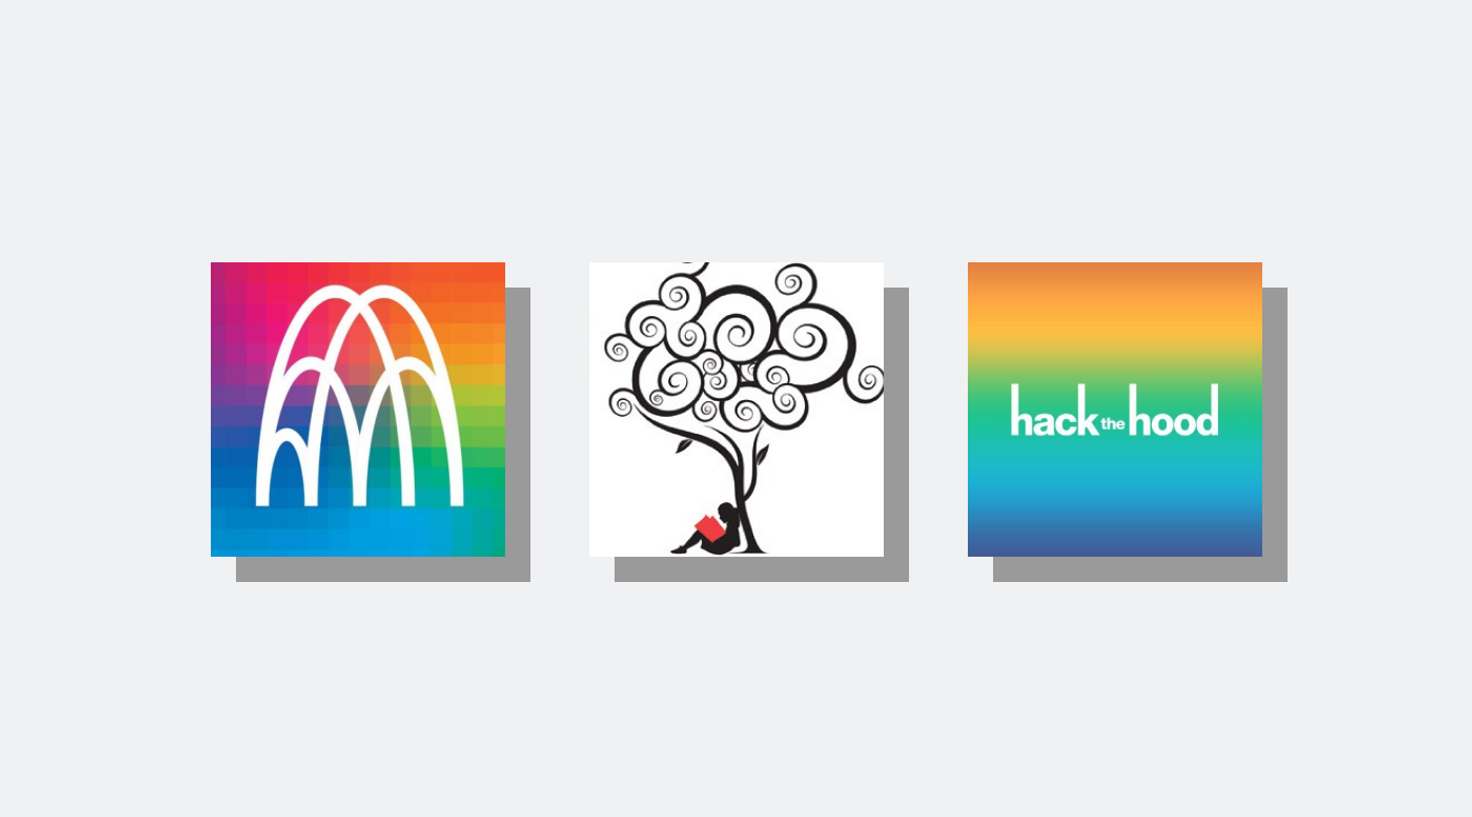 Logos of the following nonprofit organizations: Pacific Science Center, Books for Kids, and Hack the Hood